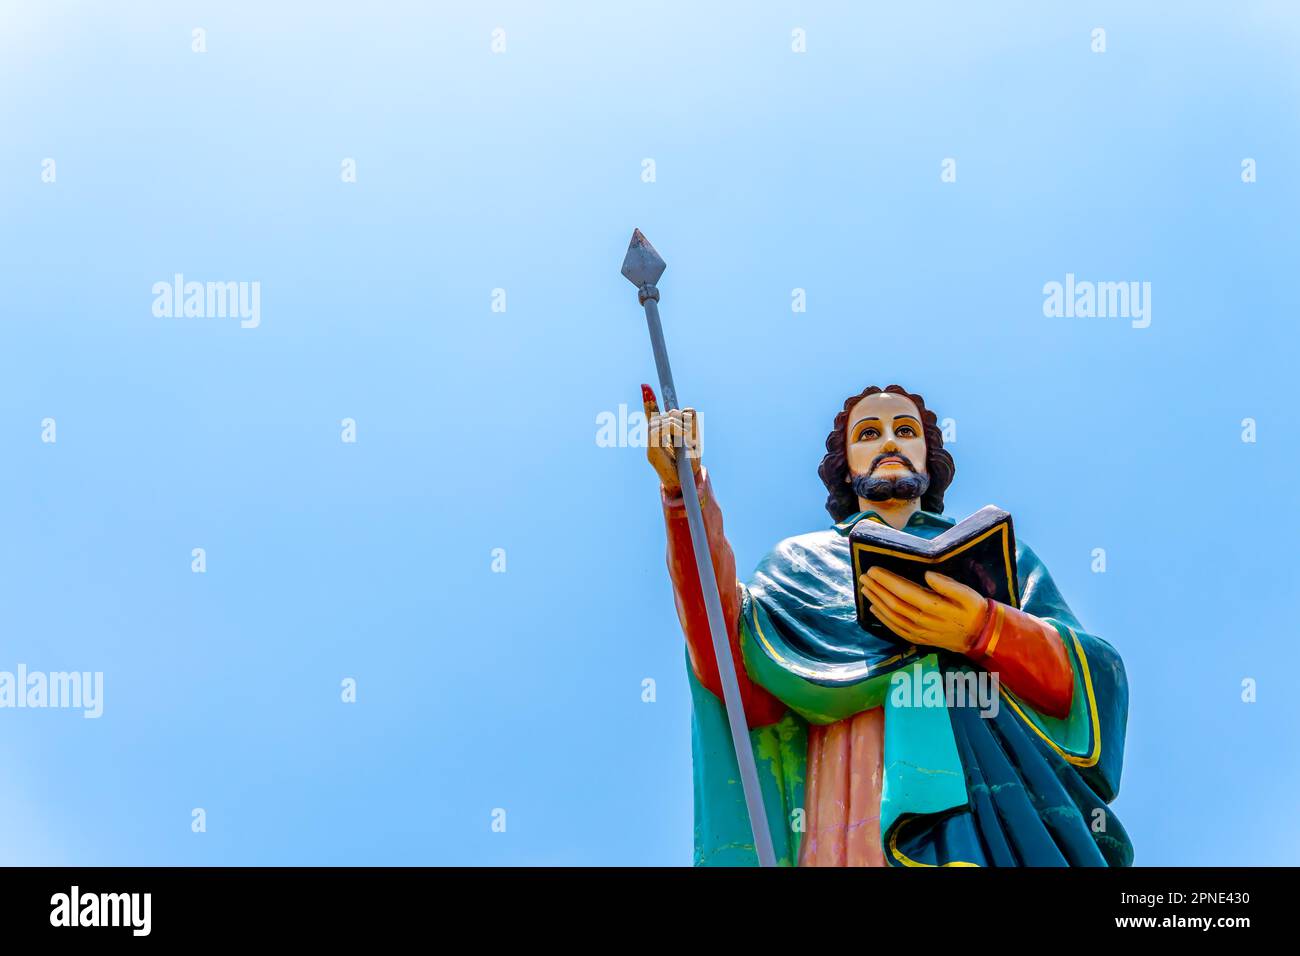 Status of Jesus with a spade or stick in one hand and a book or bible in his other hand with clear blue sky in the background Stock Photo